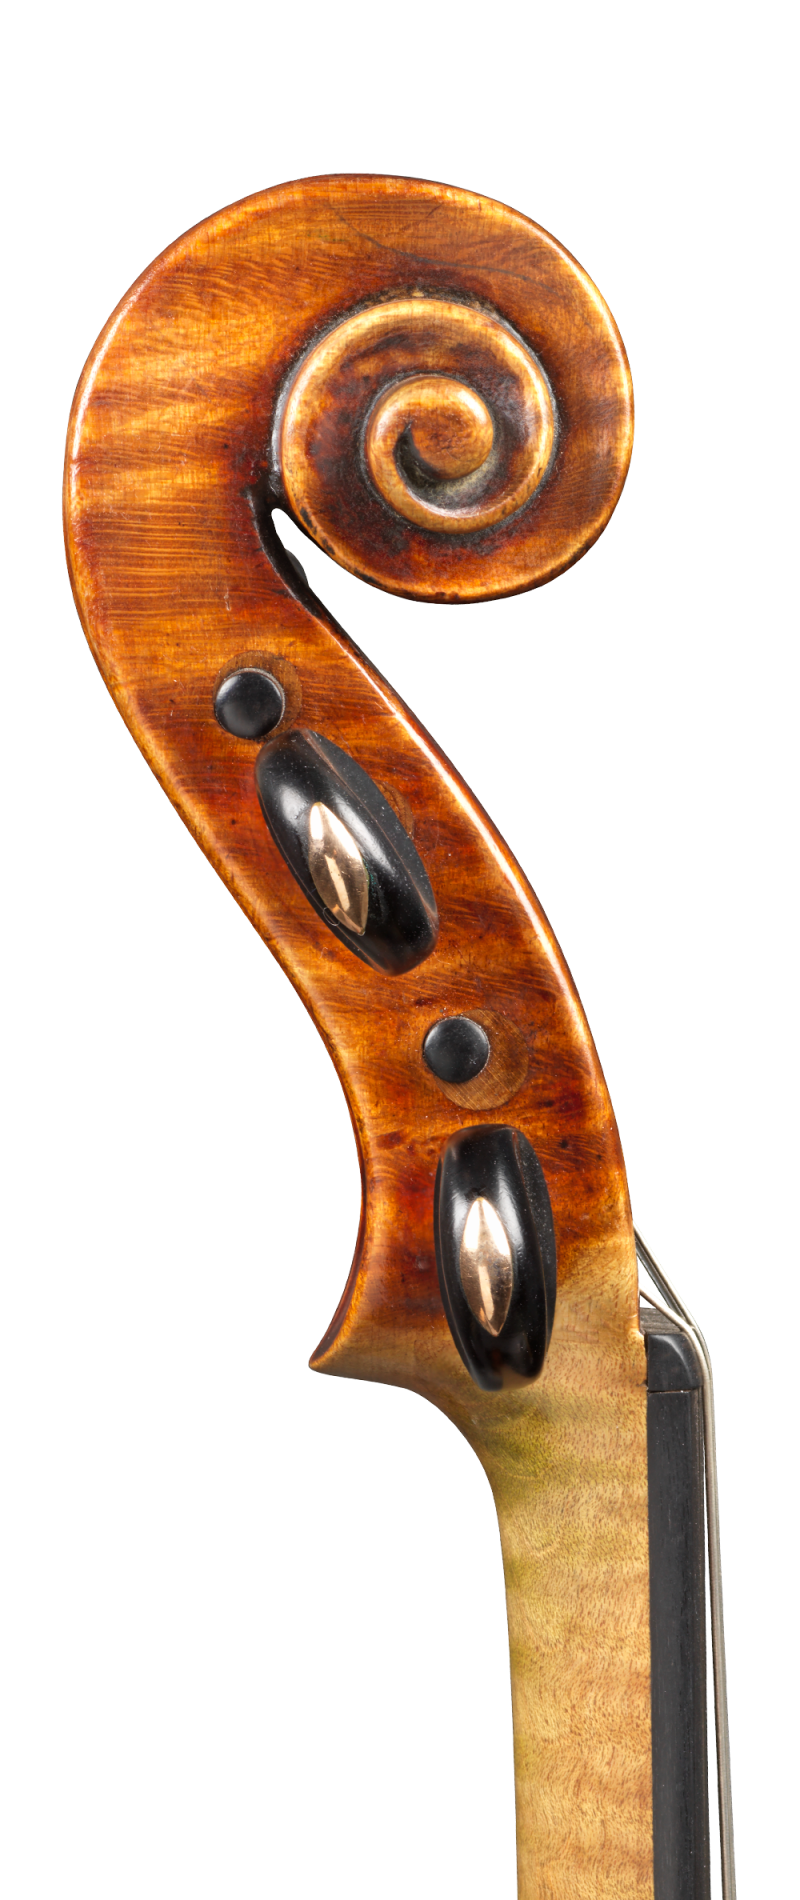 Scroll of a violin by Auguste Sébastien Philippe Bernardel, Paris, 1828. This violin has a very big and nuanced sound. Its warmth and easy response are striking.